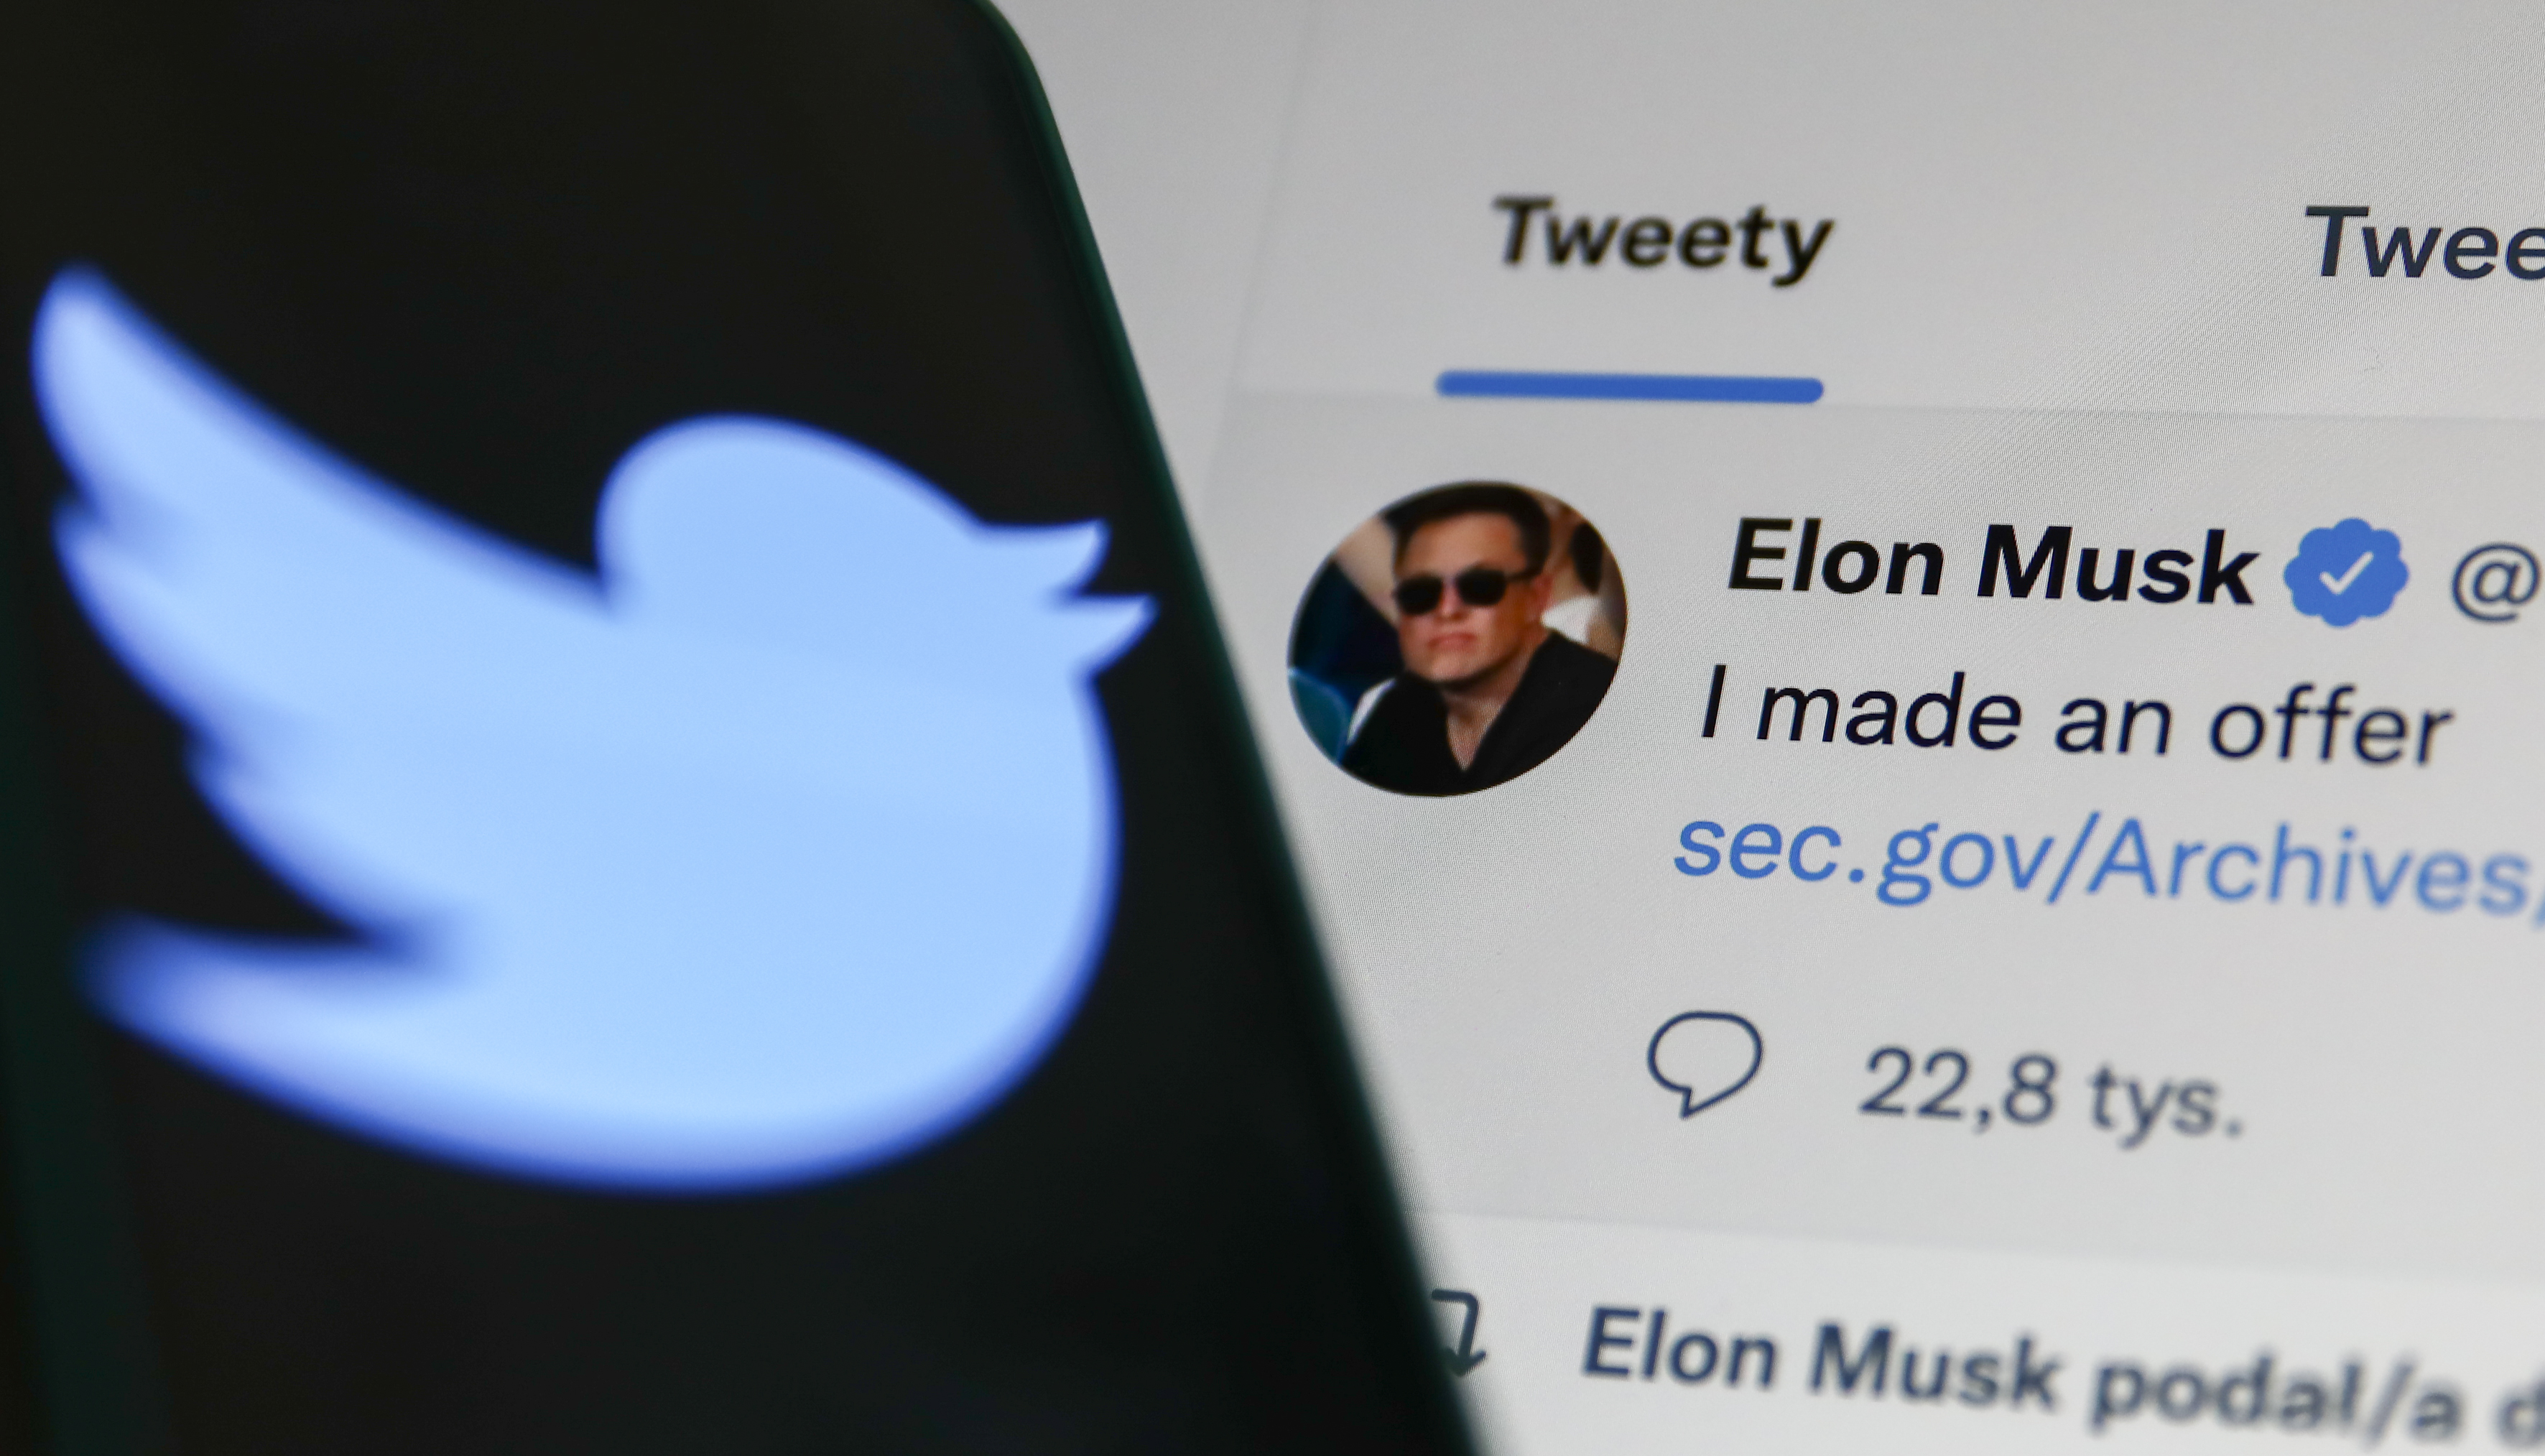 Elon Musk's Offer to Buy Twitter Risks Scaring Off Advertisers